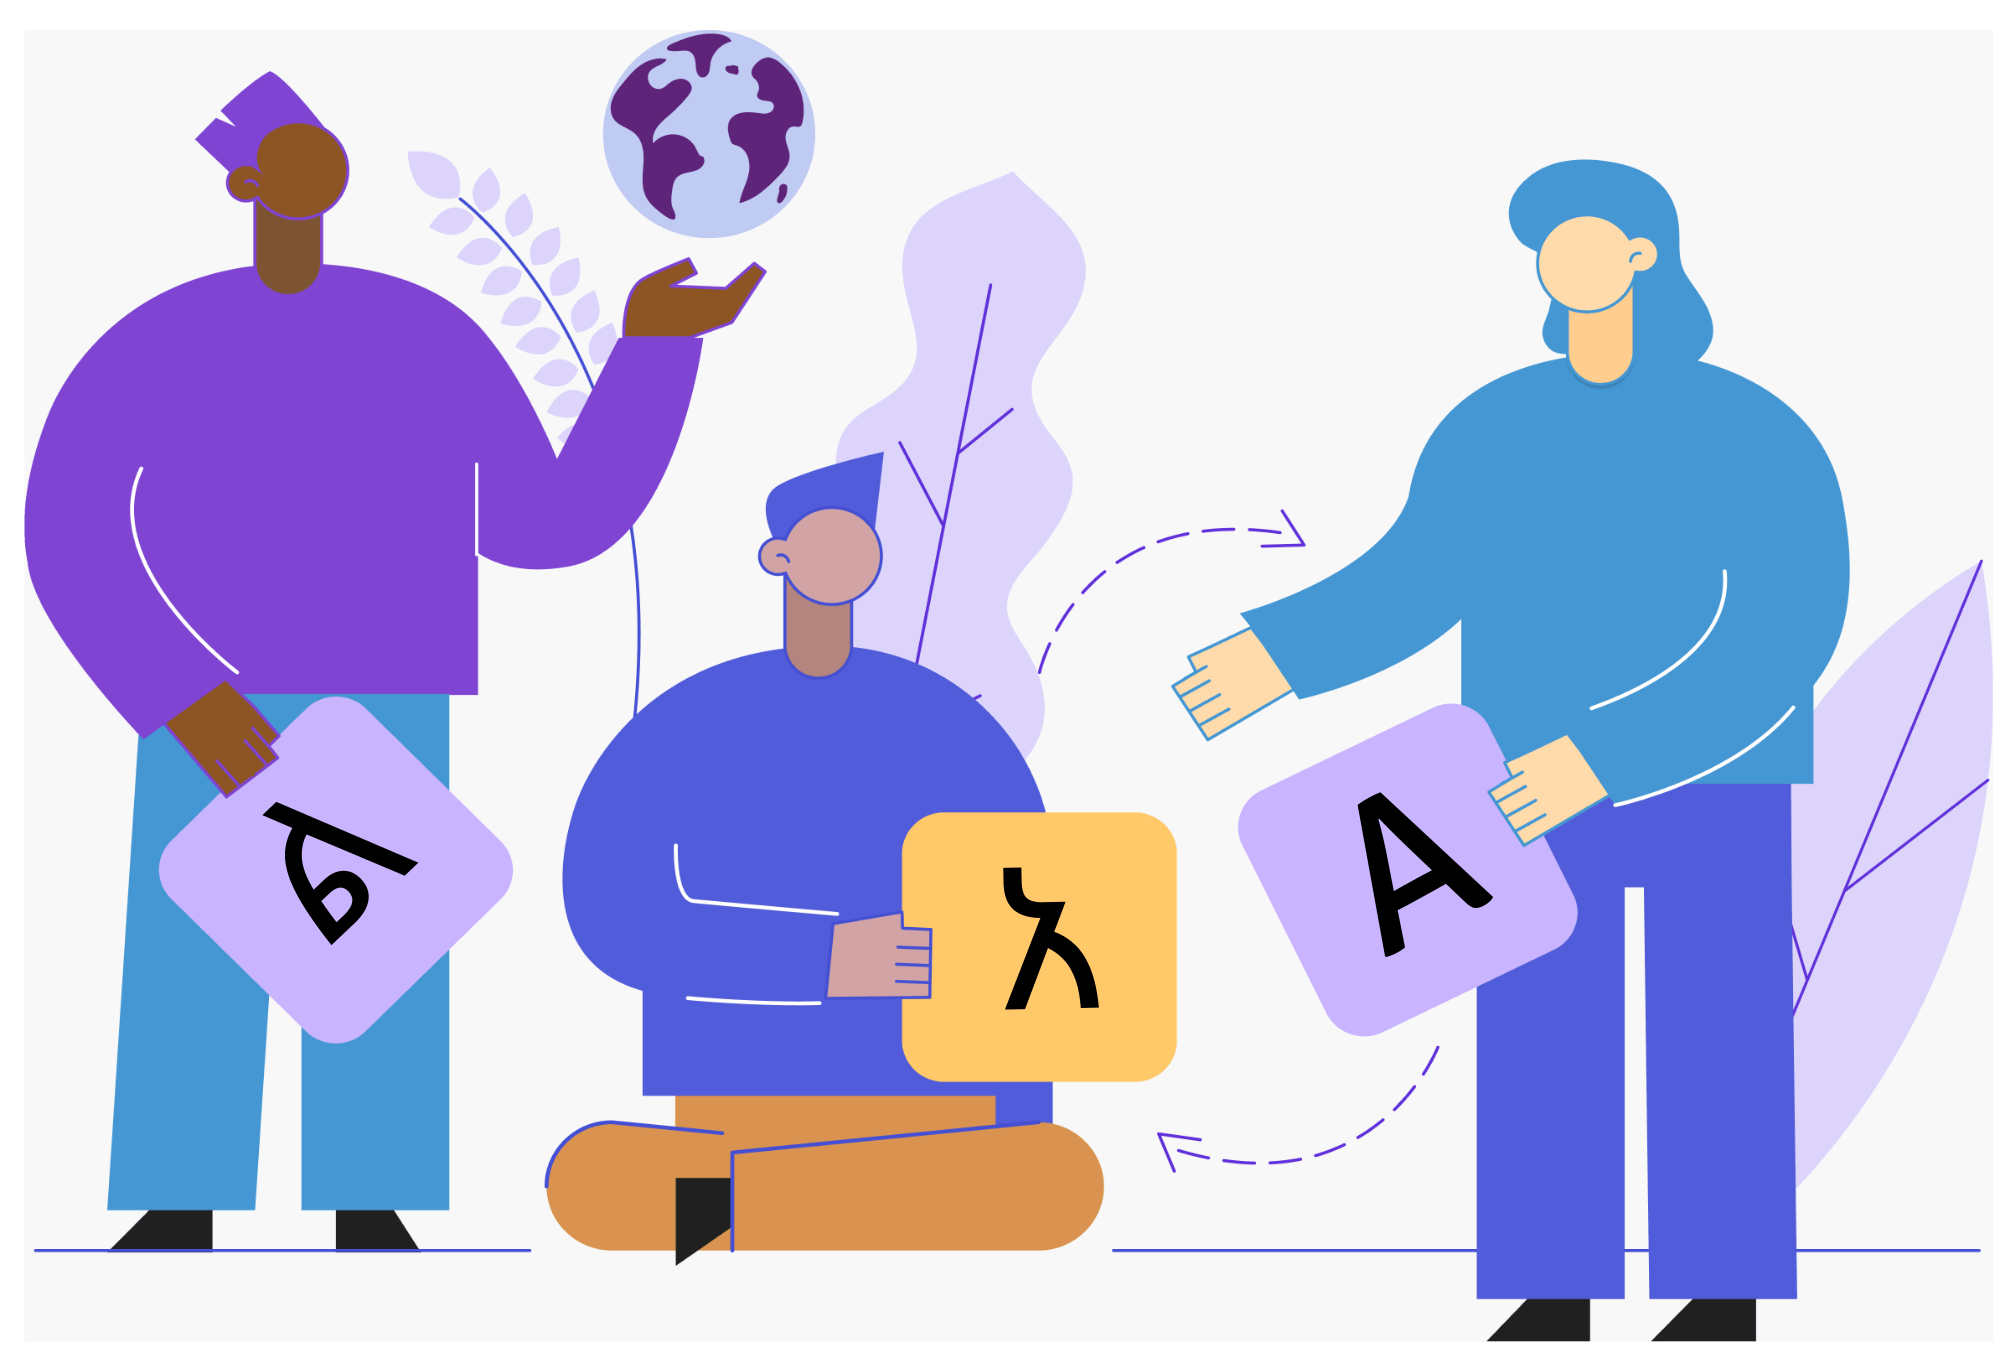 People exchanging Ge'ez and English alphabets. A person standing with the initial of Lesan on one hand and the world on the other symbolizing our mission to make the web accessible.